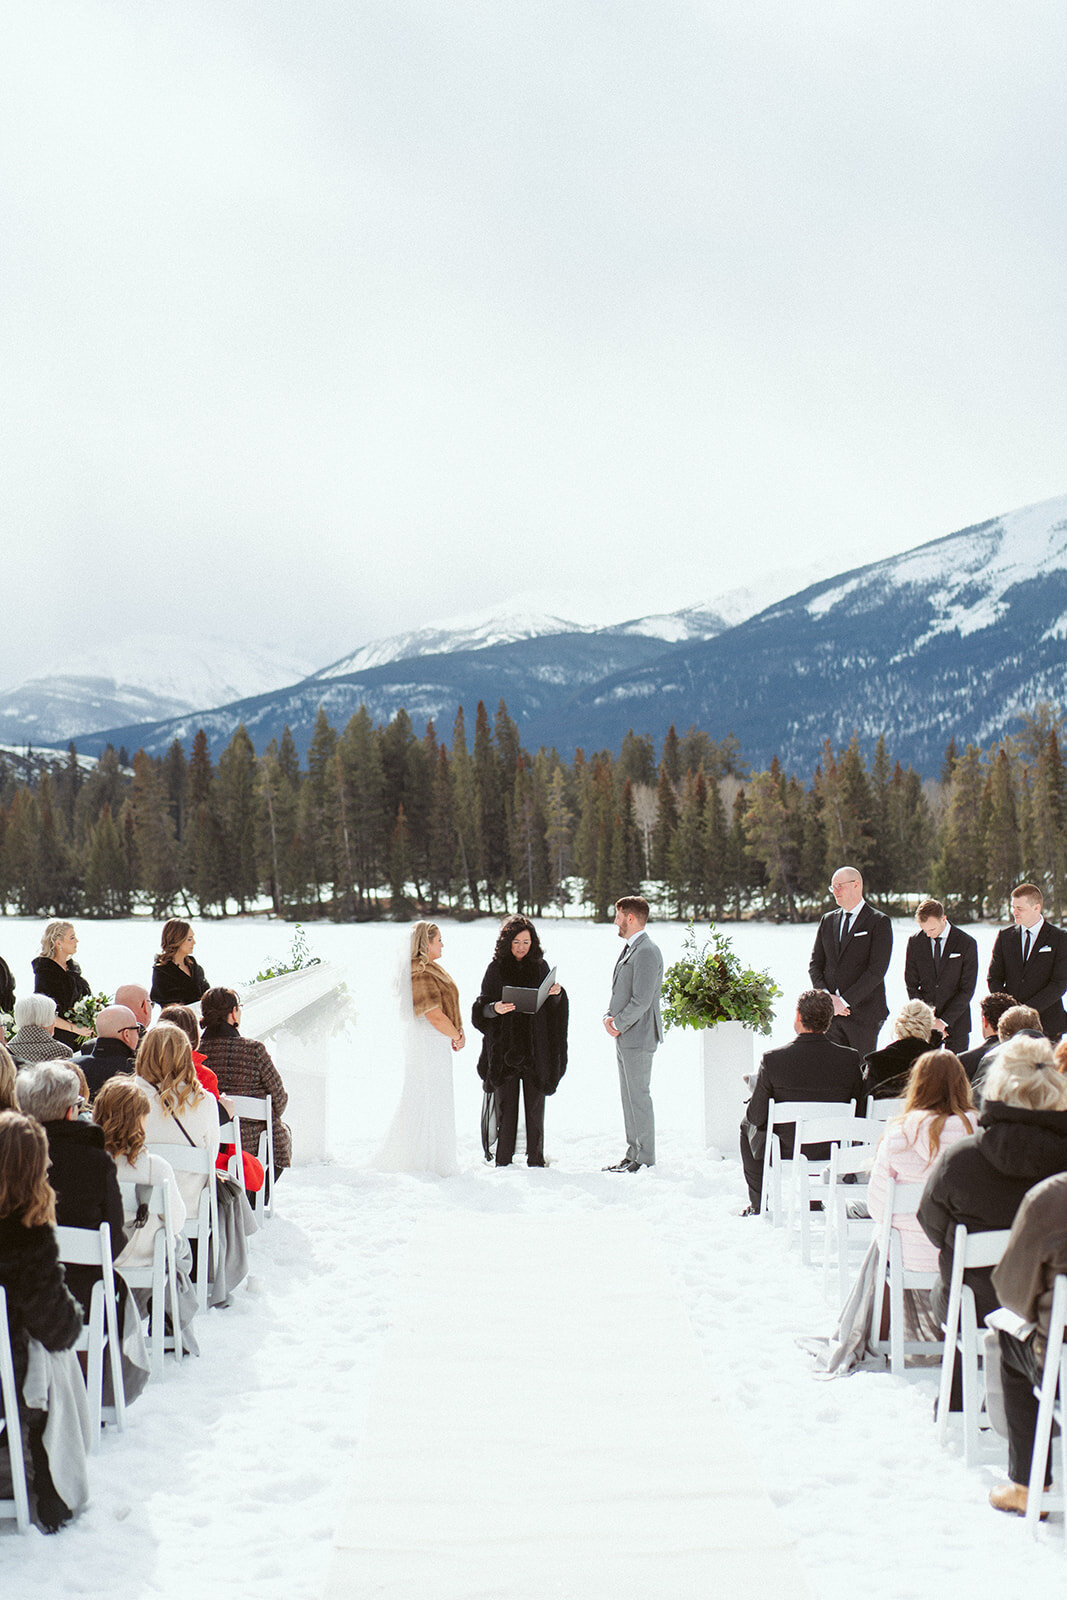 Bride and groom saying their vows in outdoor mountain wedding.